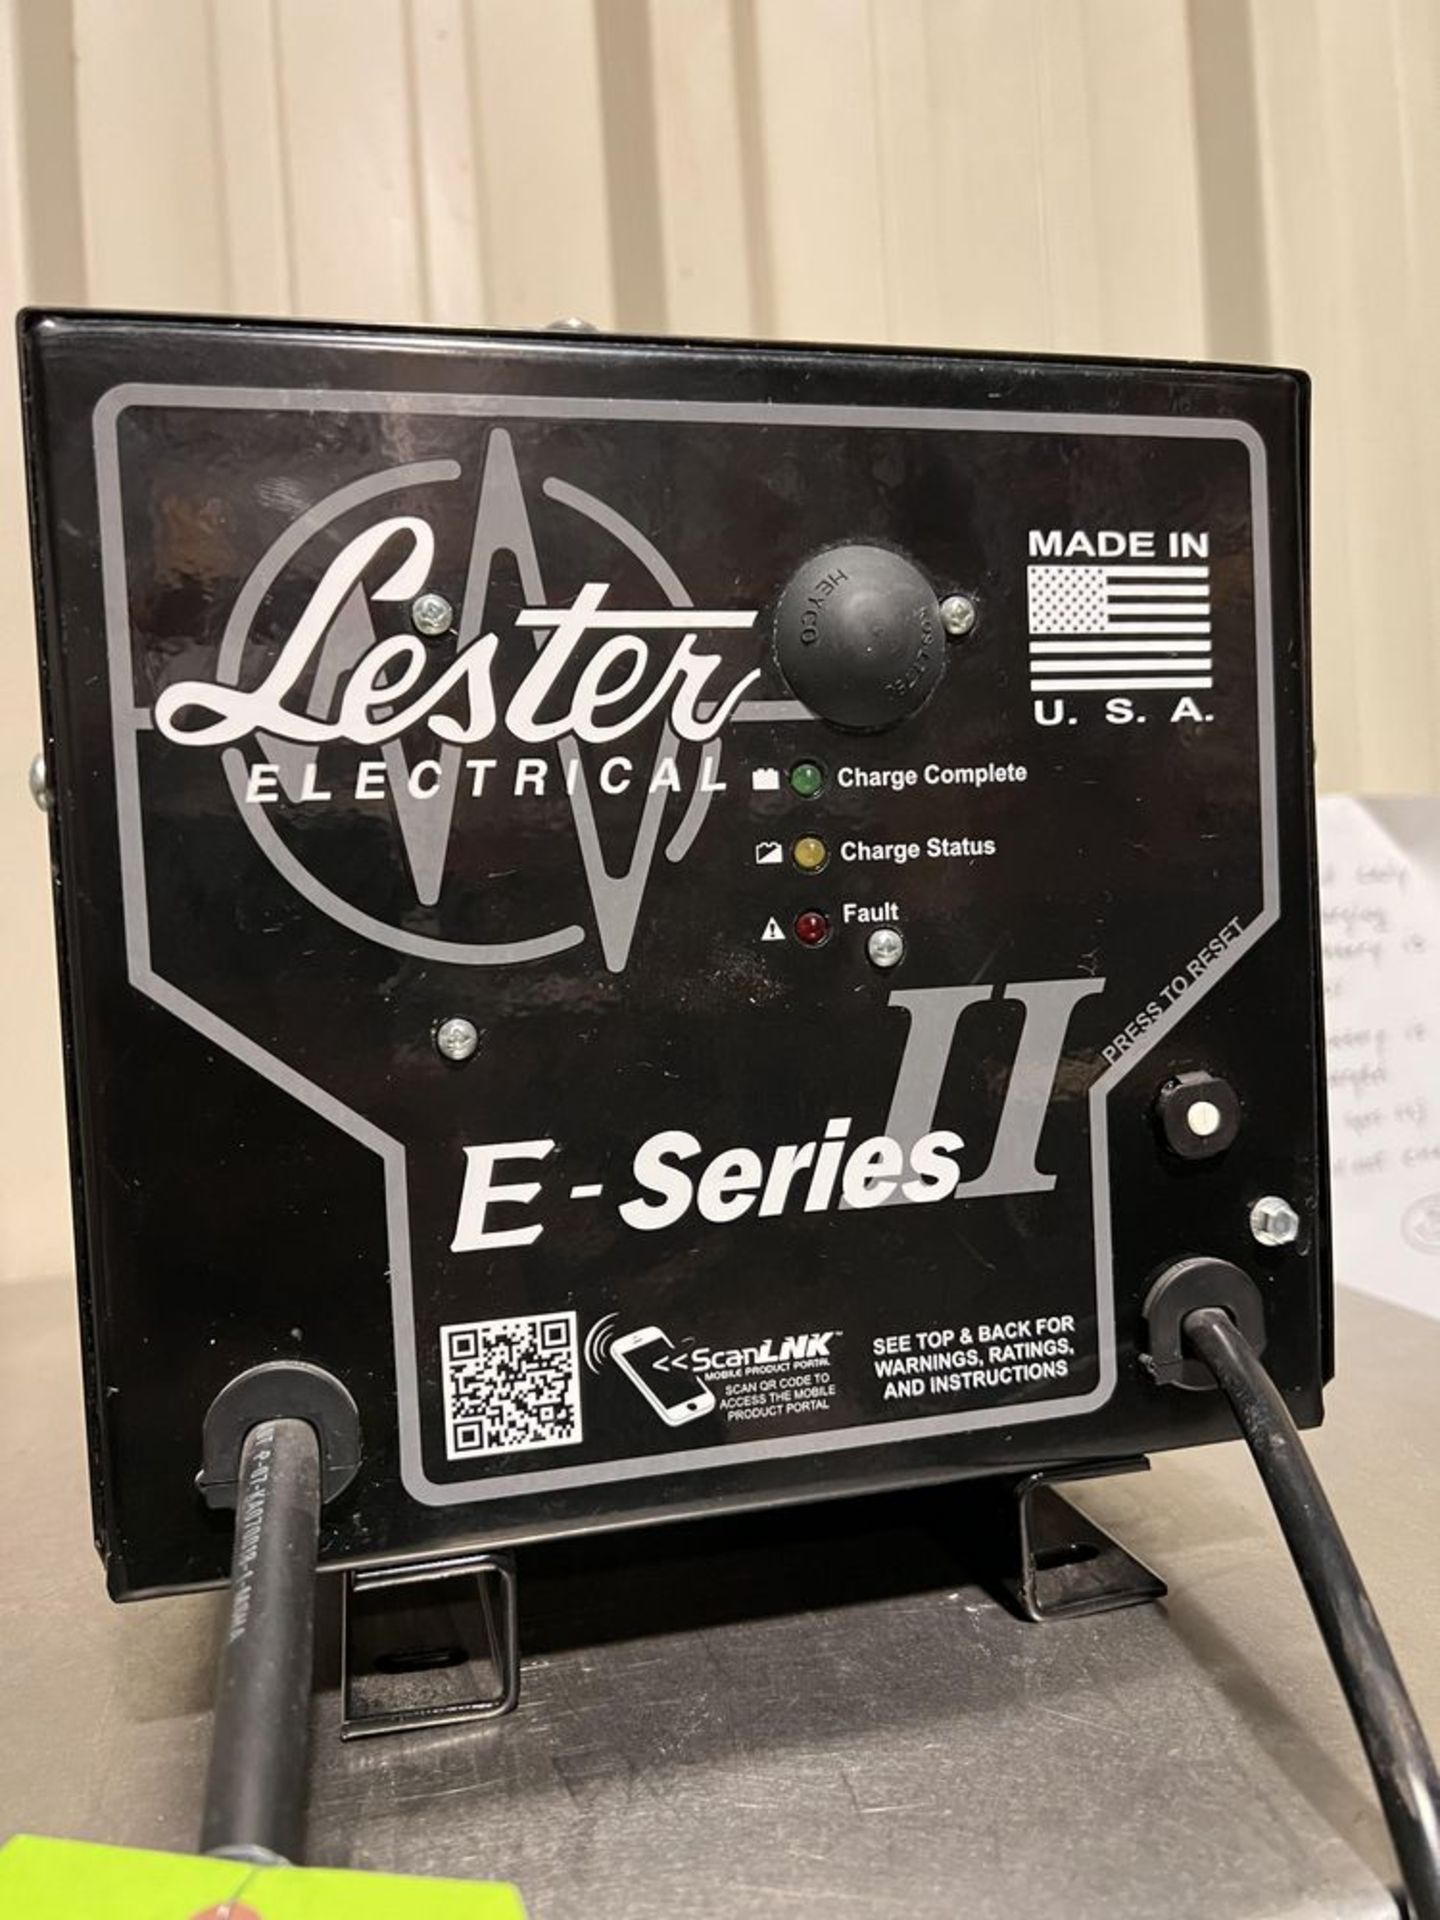 LESTER ELECTRICAL E-SERIES 2 BATTERY CHARGER, MODEL 28060A03N181W1A1, 120 V, 1 PHASE, 60 HZ - Bild 2 aus 4